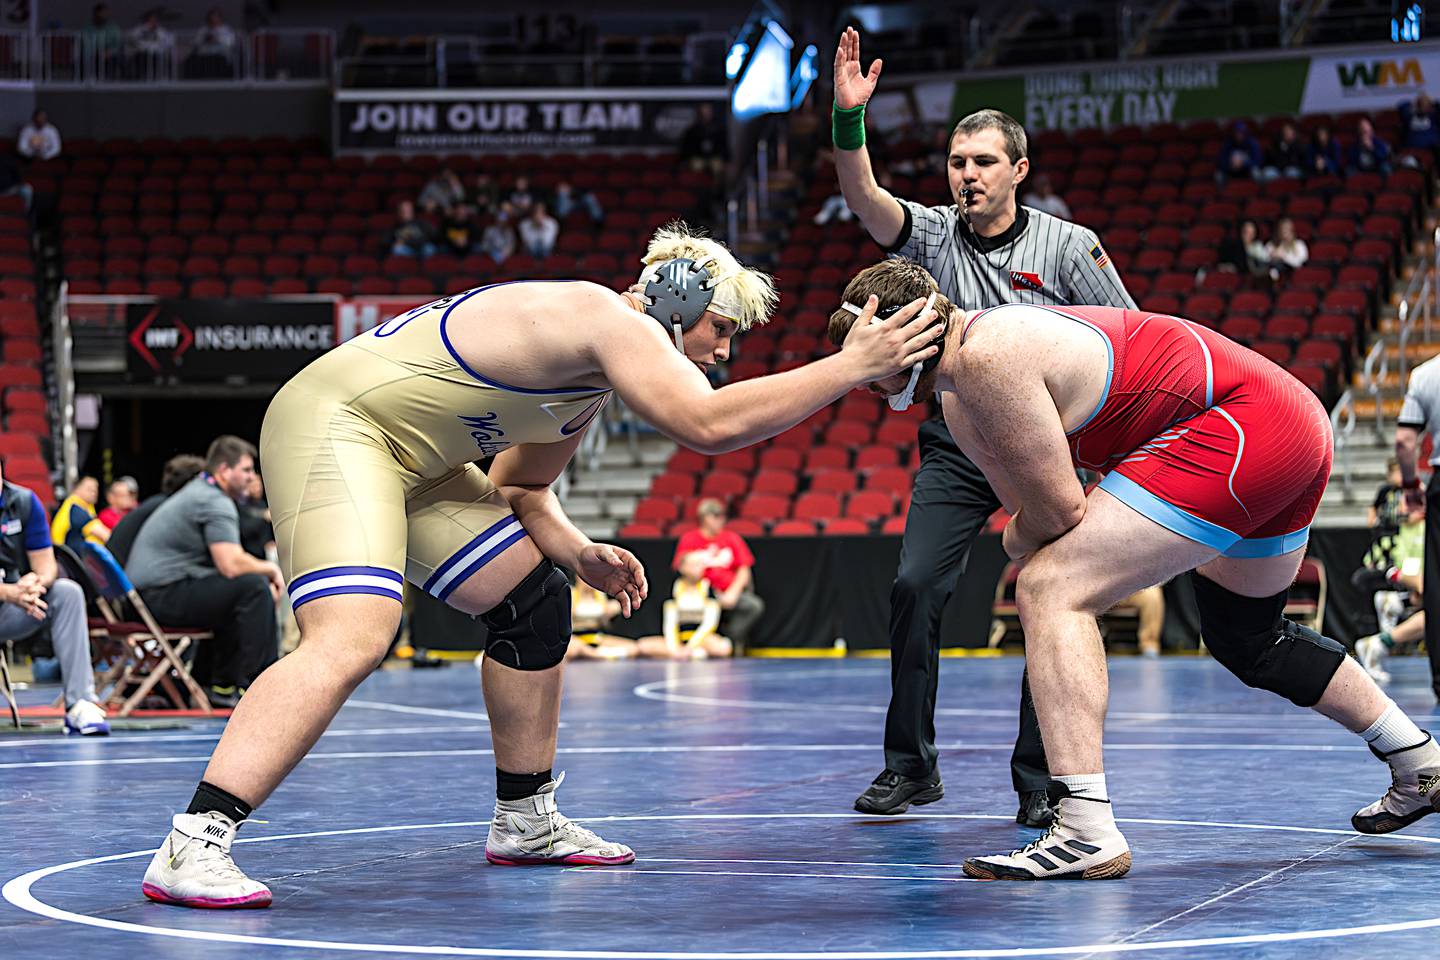 NV/OM heavyweight Trent Warner looks for his next shot against Cody Fox of East Buchanan in the bronze medal match at the state tournament.